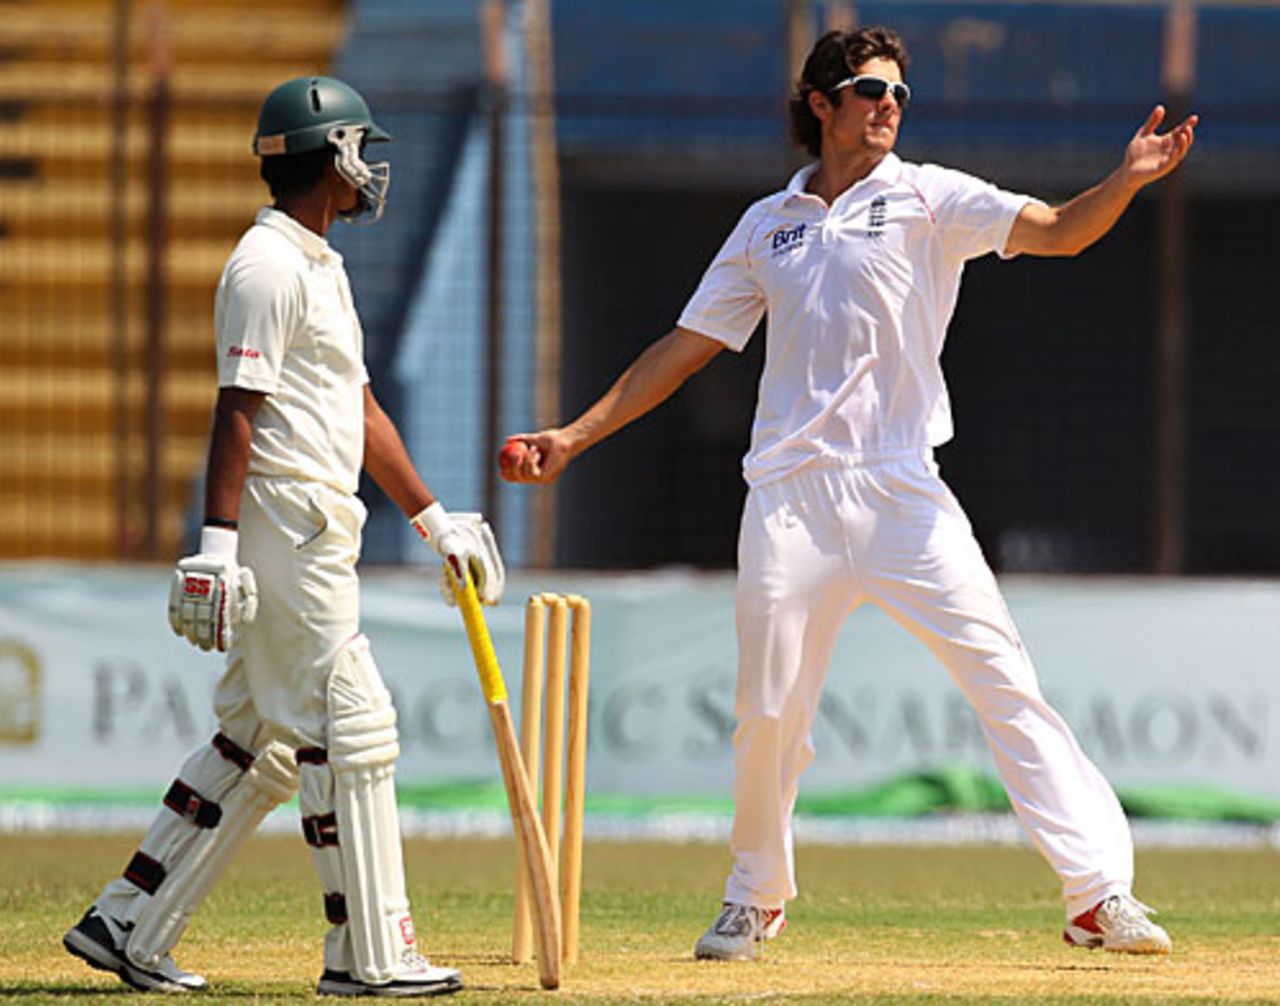 Alastair Cook came in for some punishment, Bangladesh A v England XI, tour match, Chittagong, 3rd day, March 9, 2010